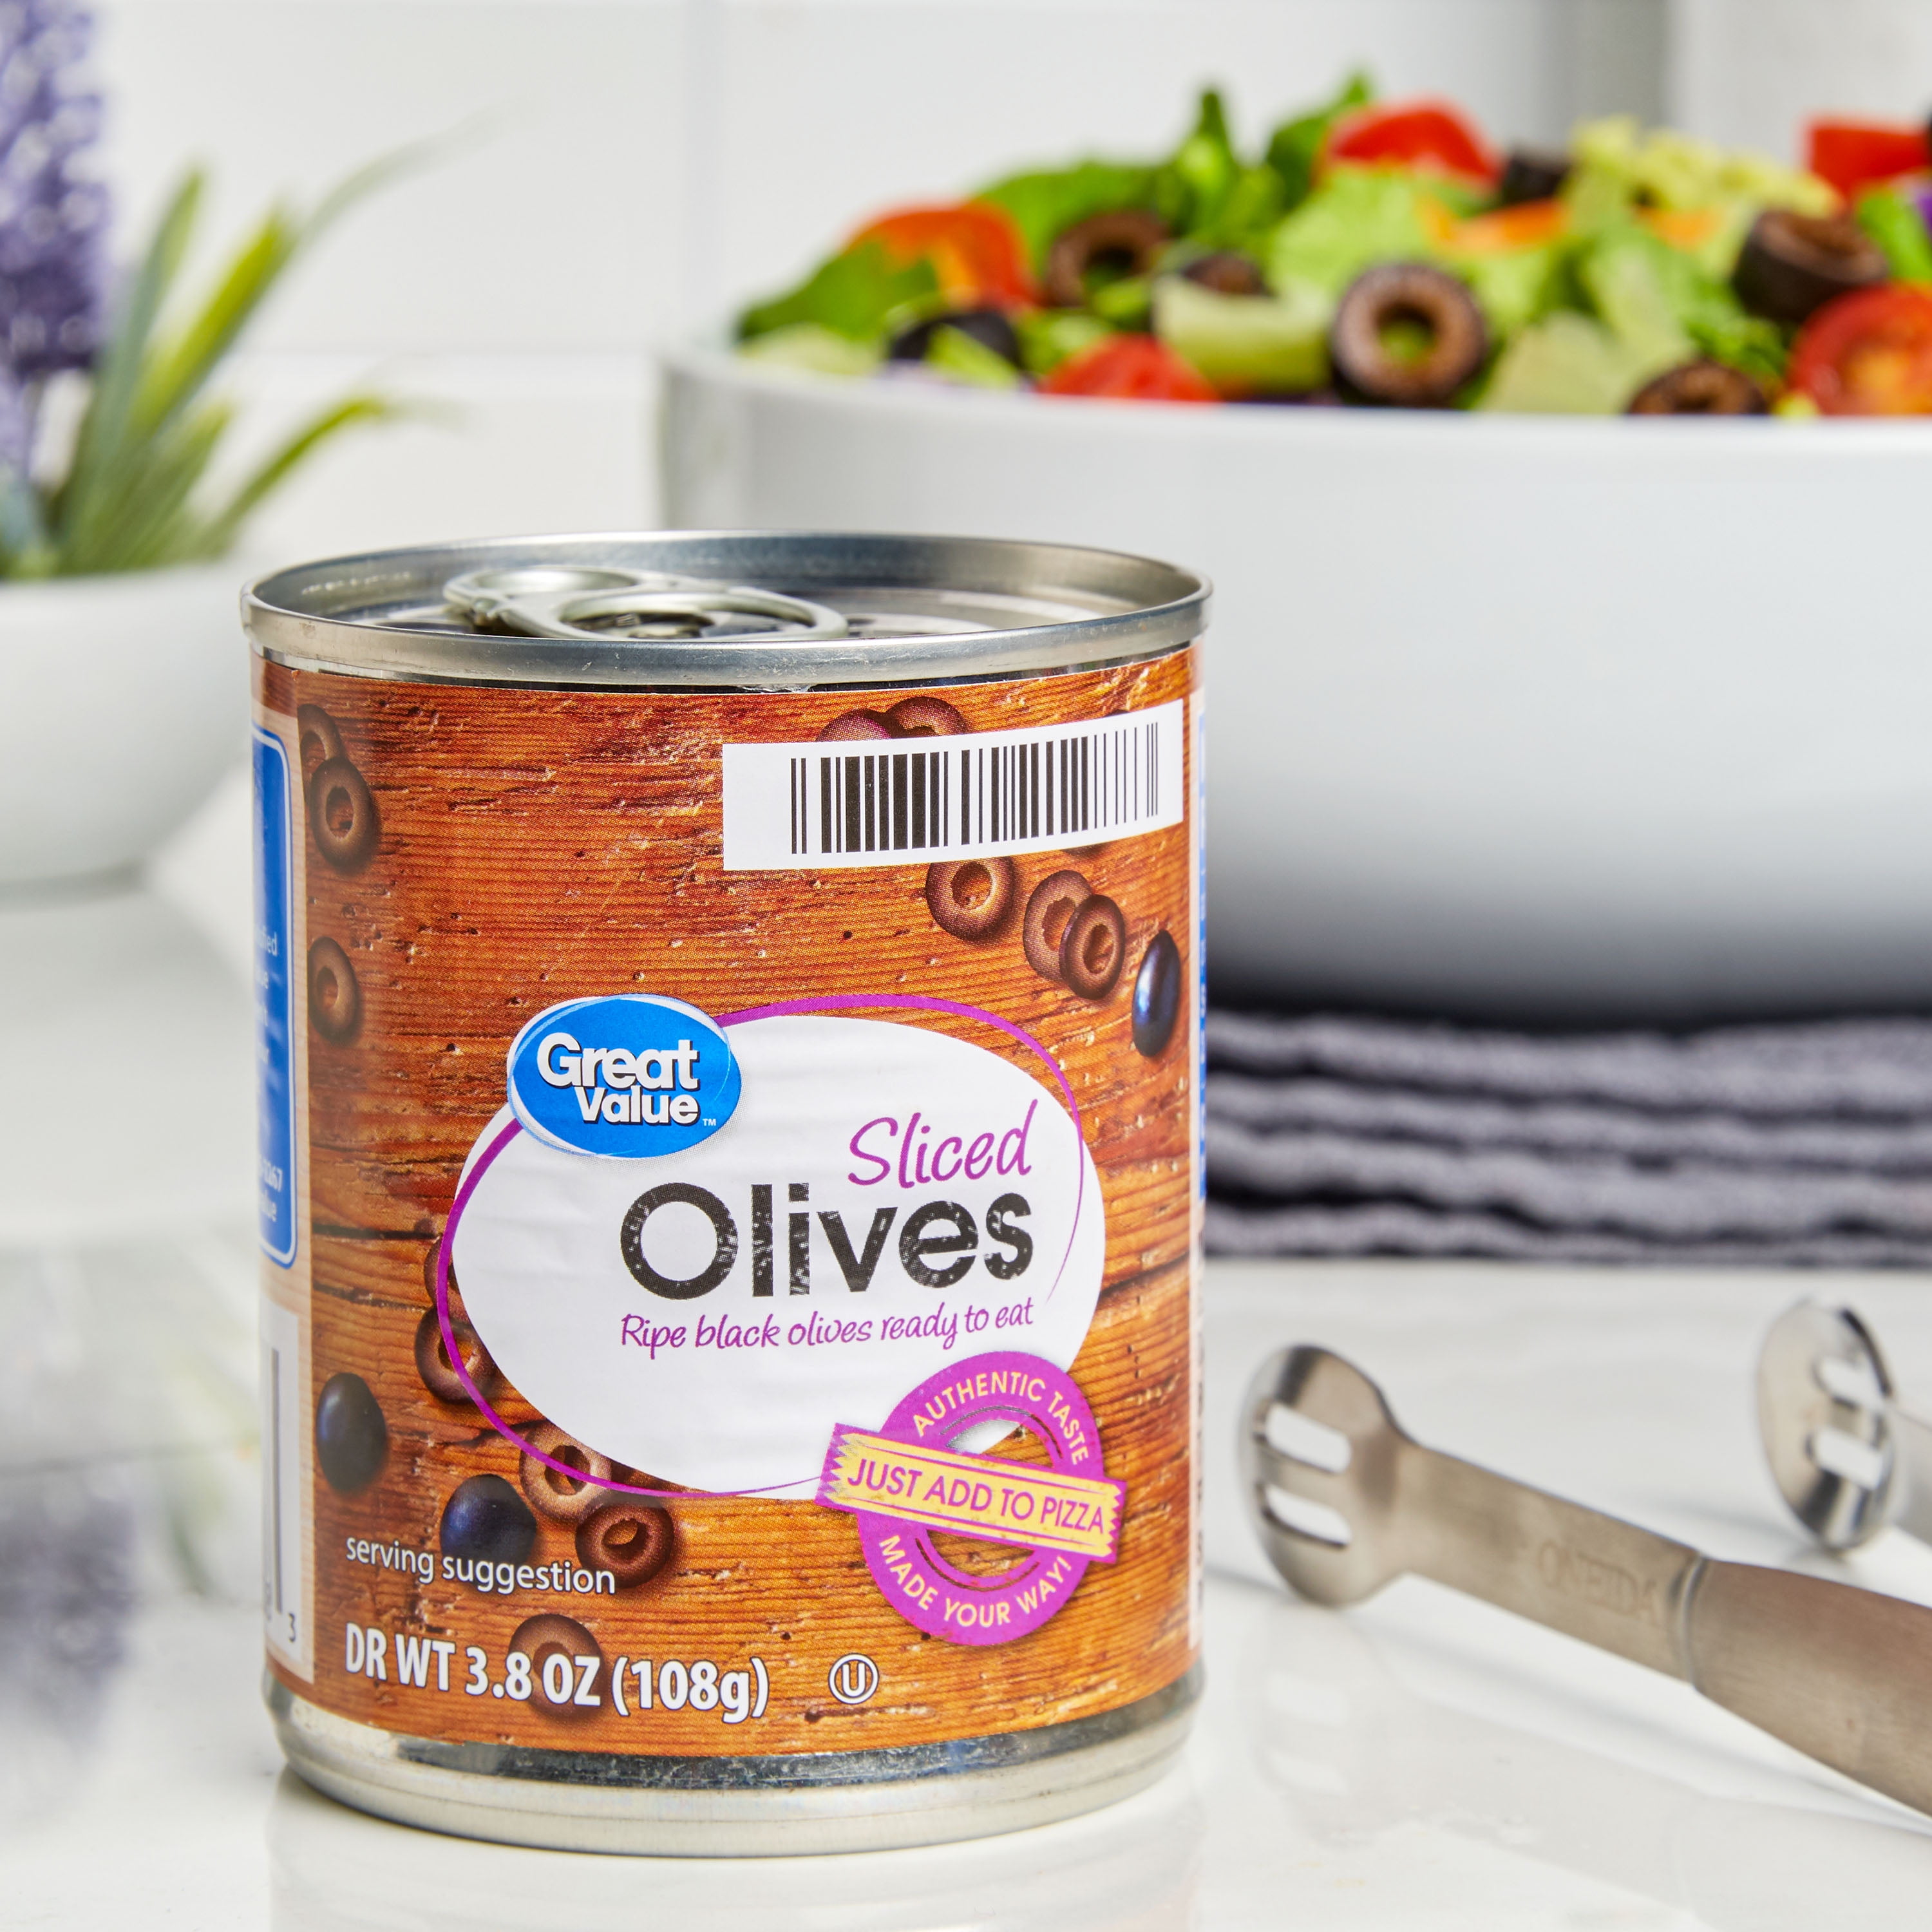 Sliced Ripe Olives, Our Products